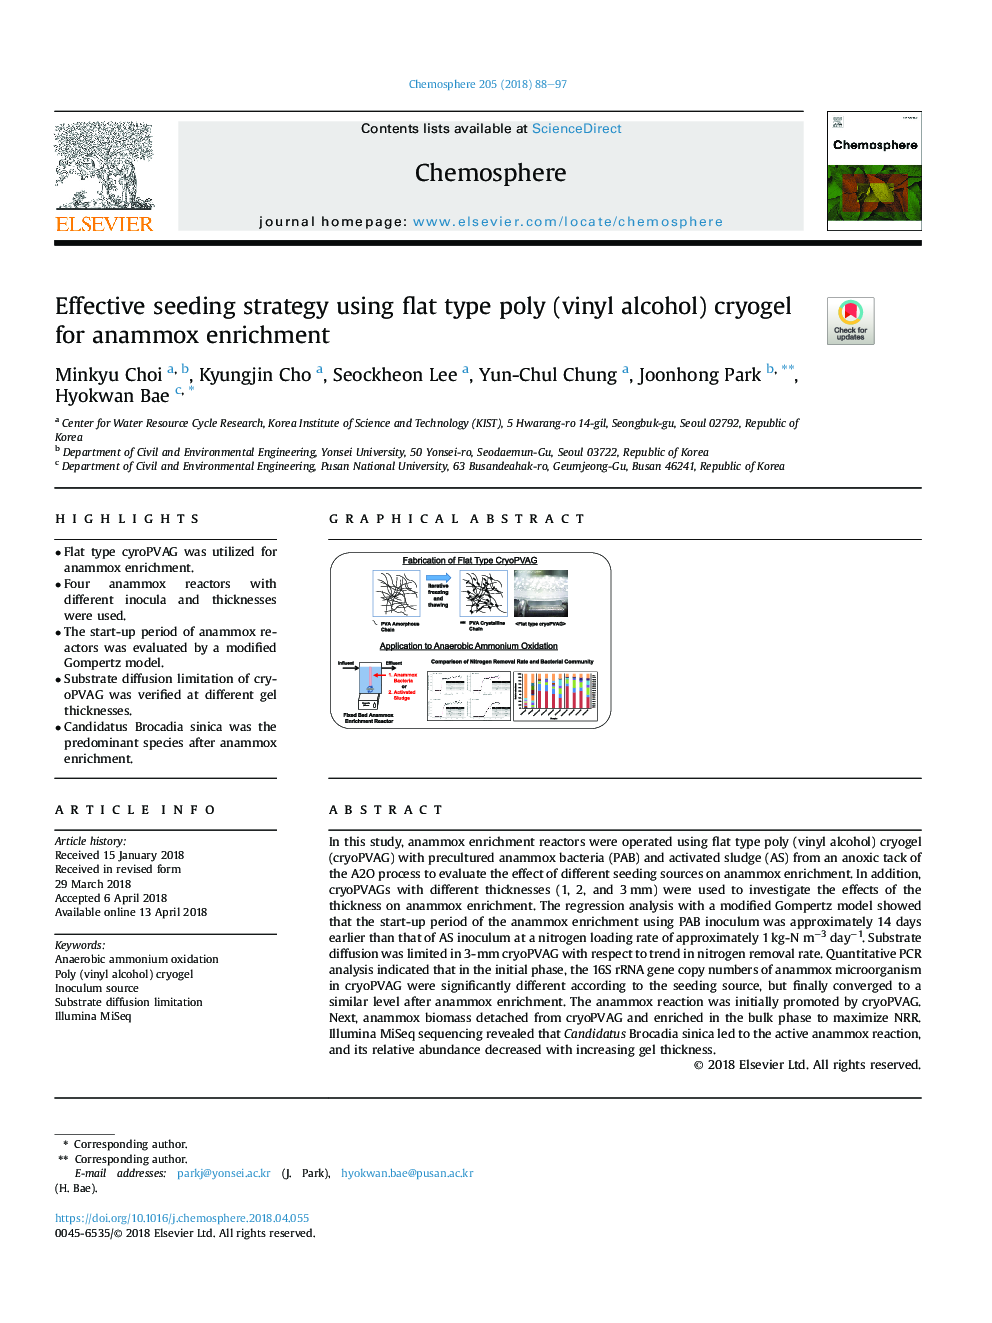 Effective seeding strategy using flat type poly (vinyl alcohol) cryogel for anammox enrichment